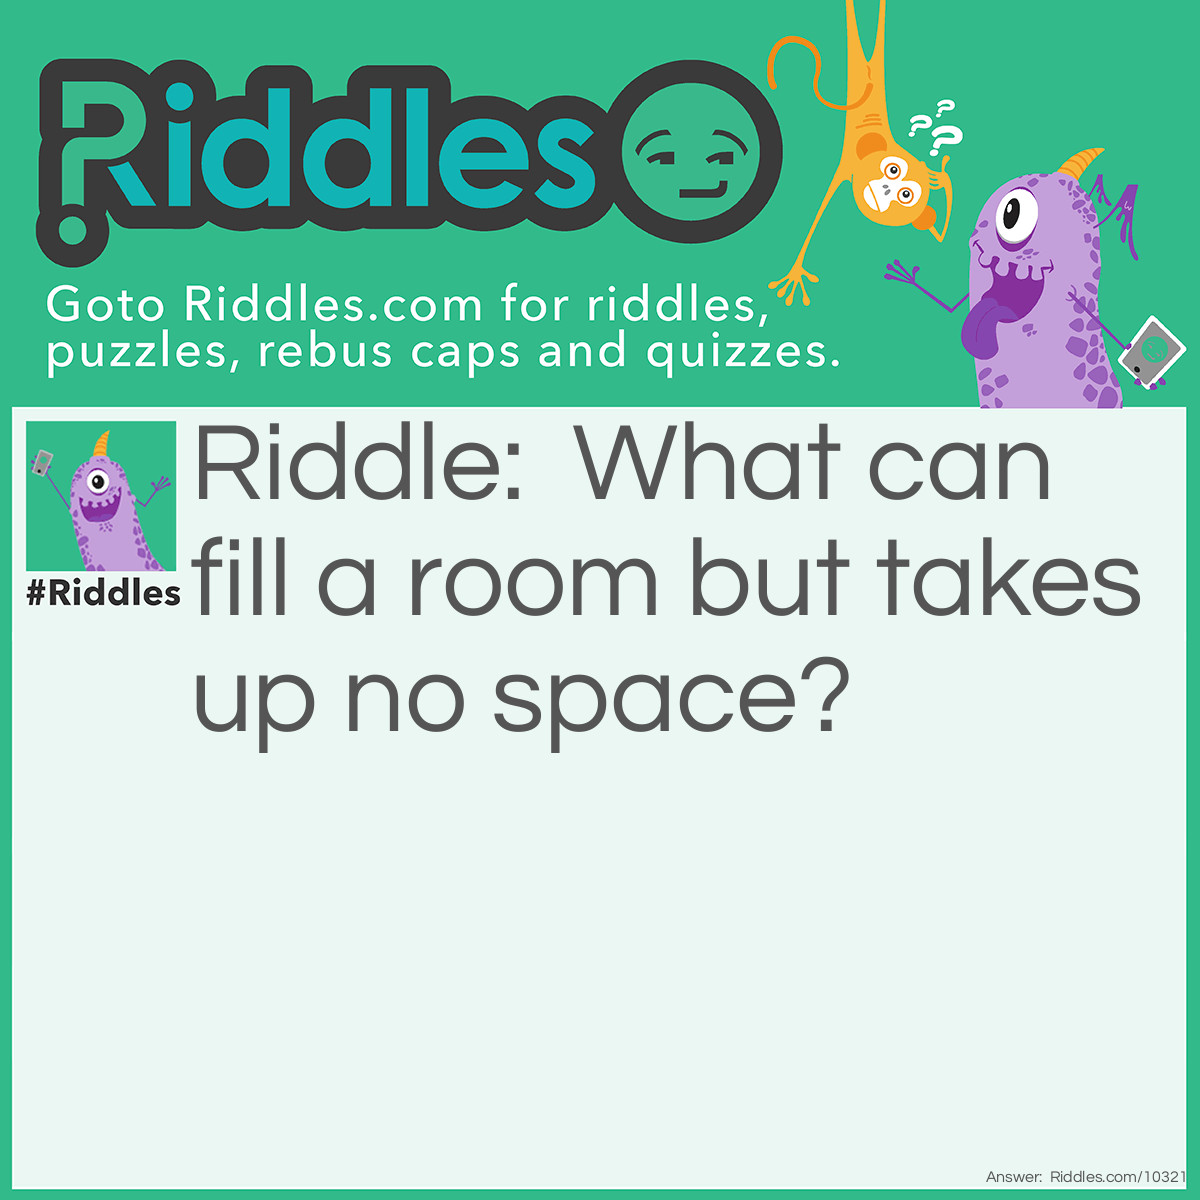 Riddle: What can fill a room but takes up no space? Answer: Lights